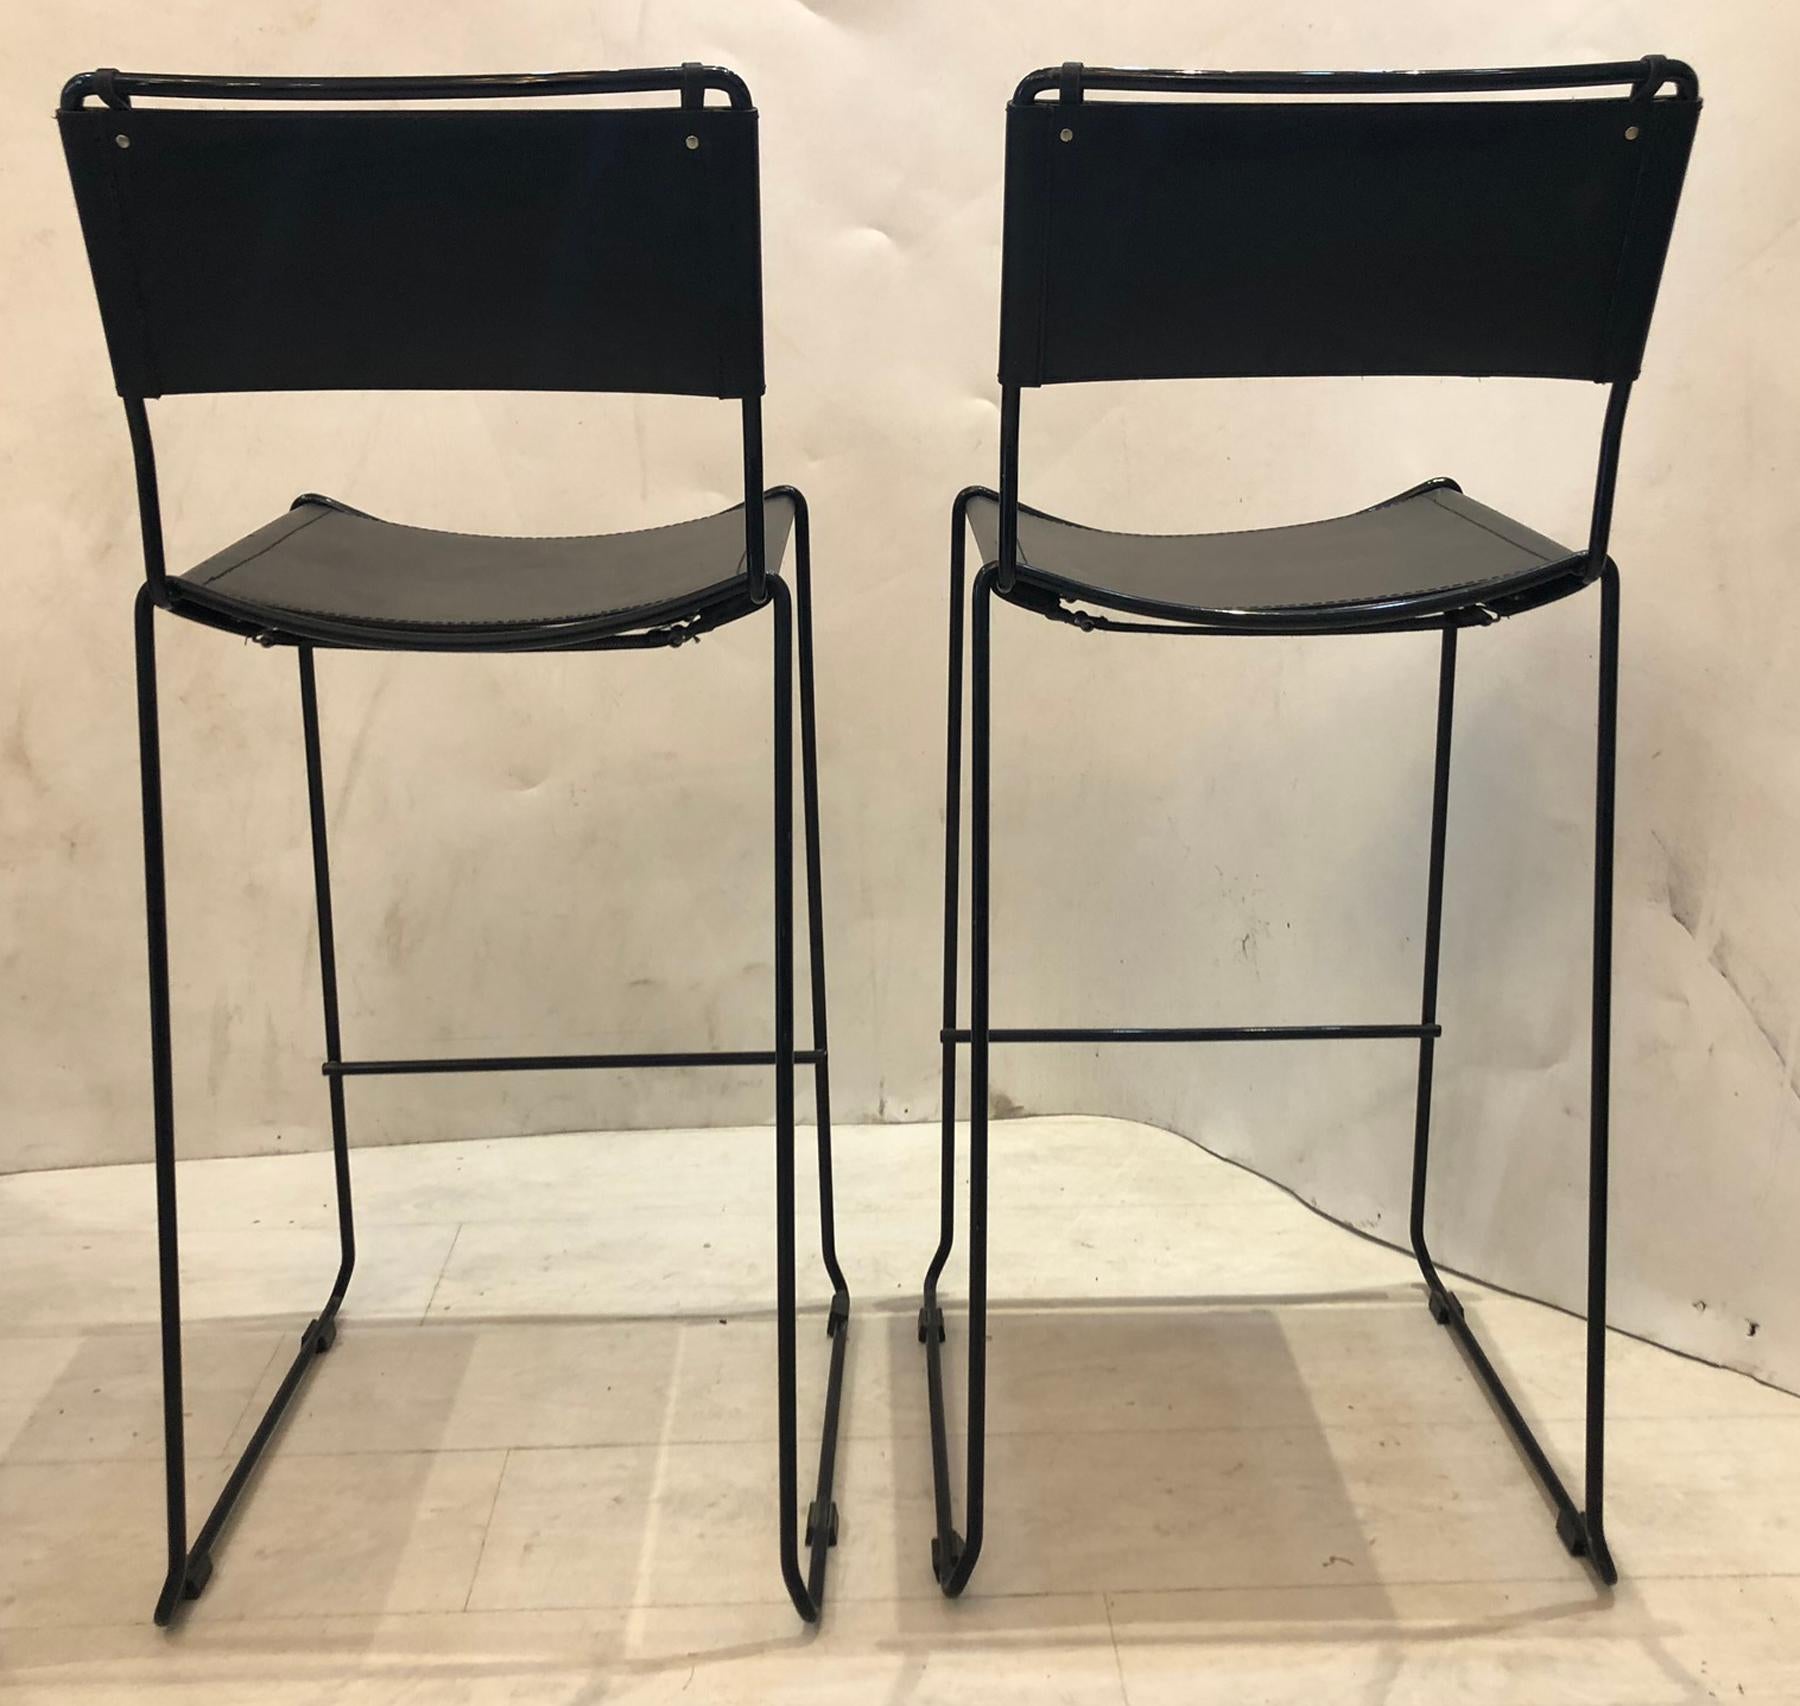 Italian Bar Stools Black Metal With Black Leather Covers 2